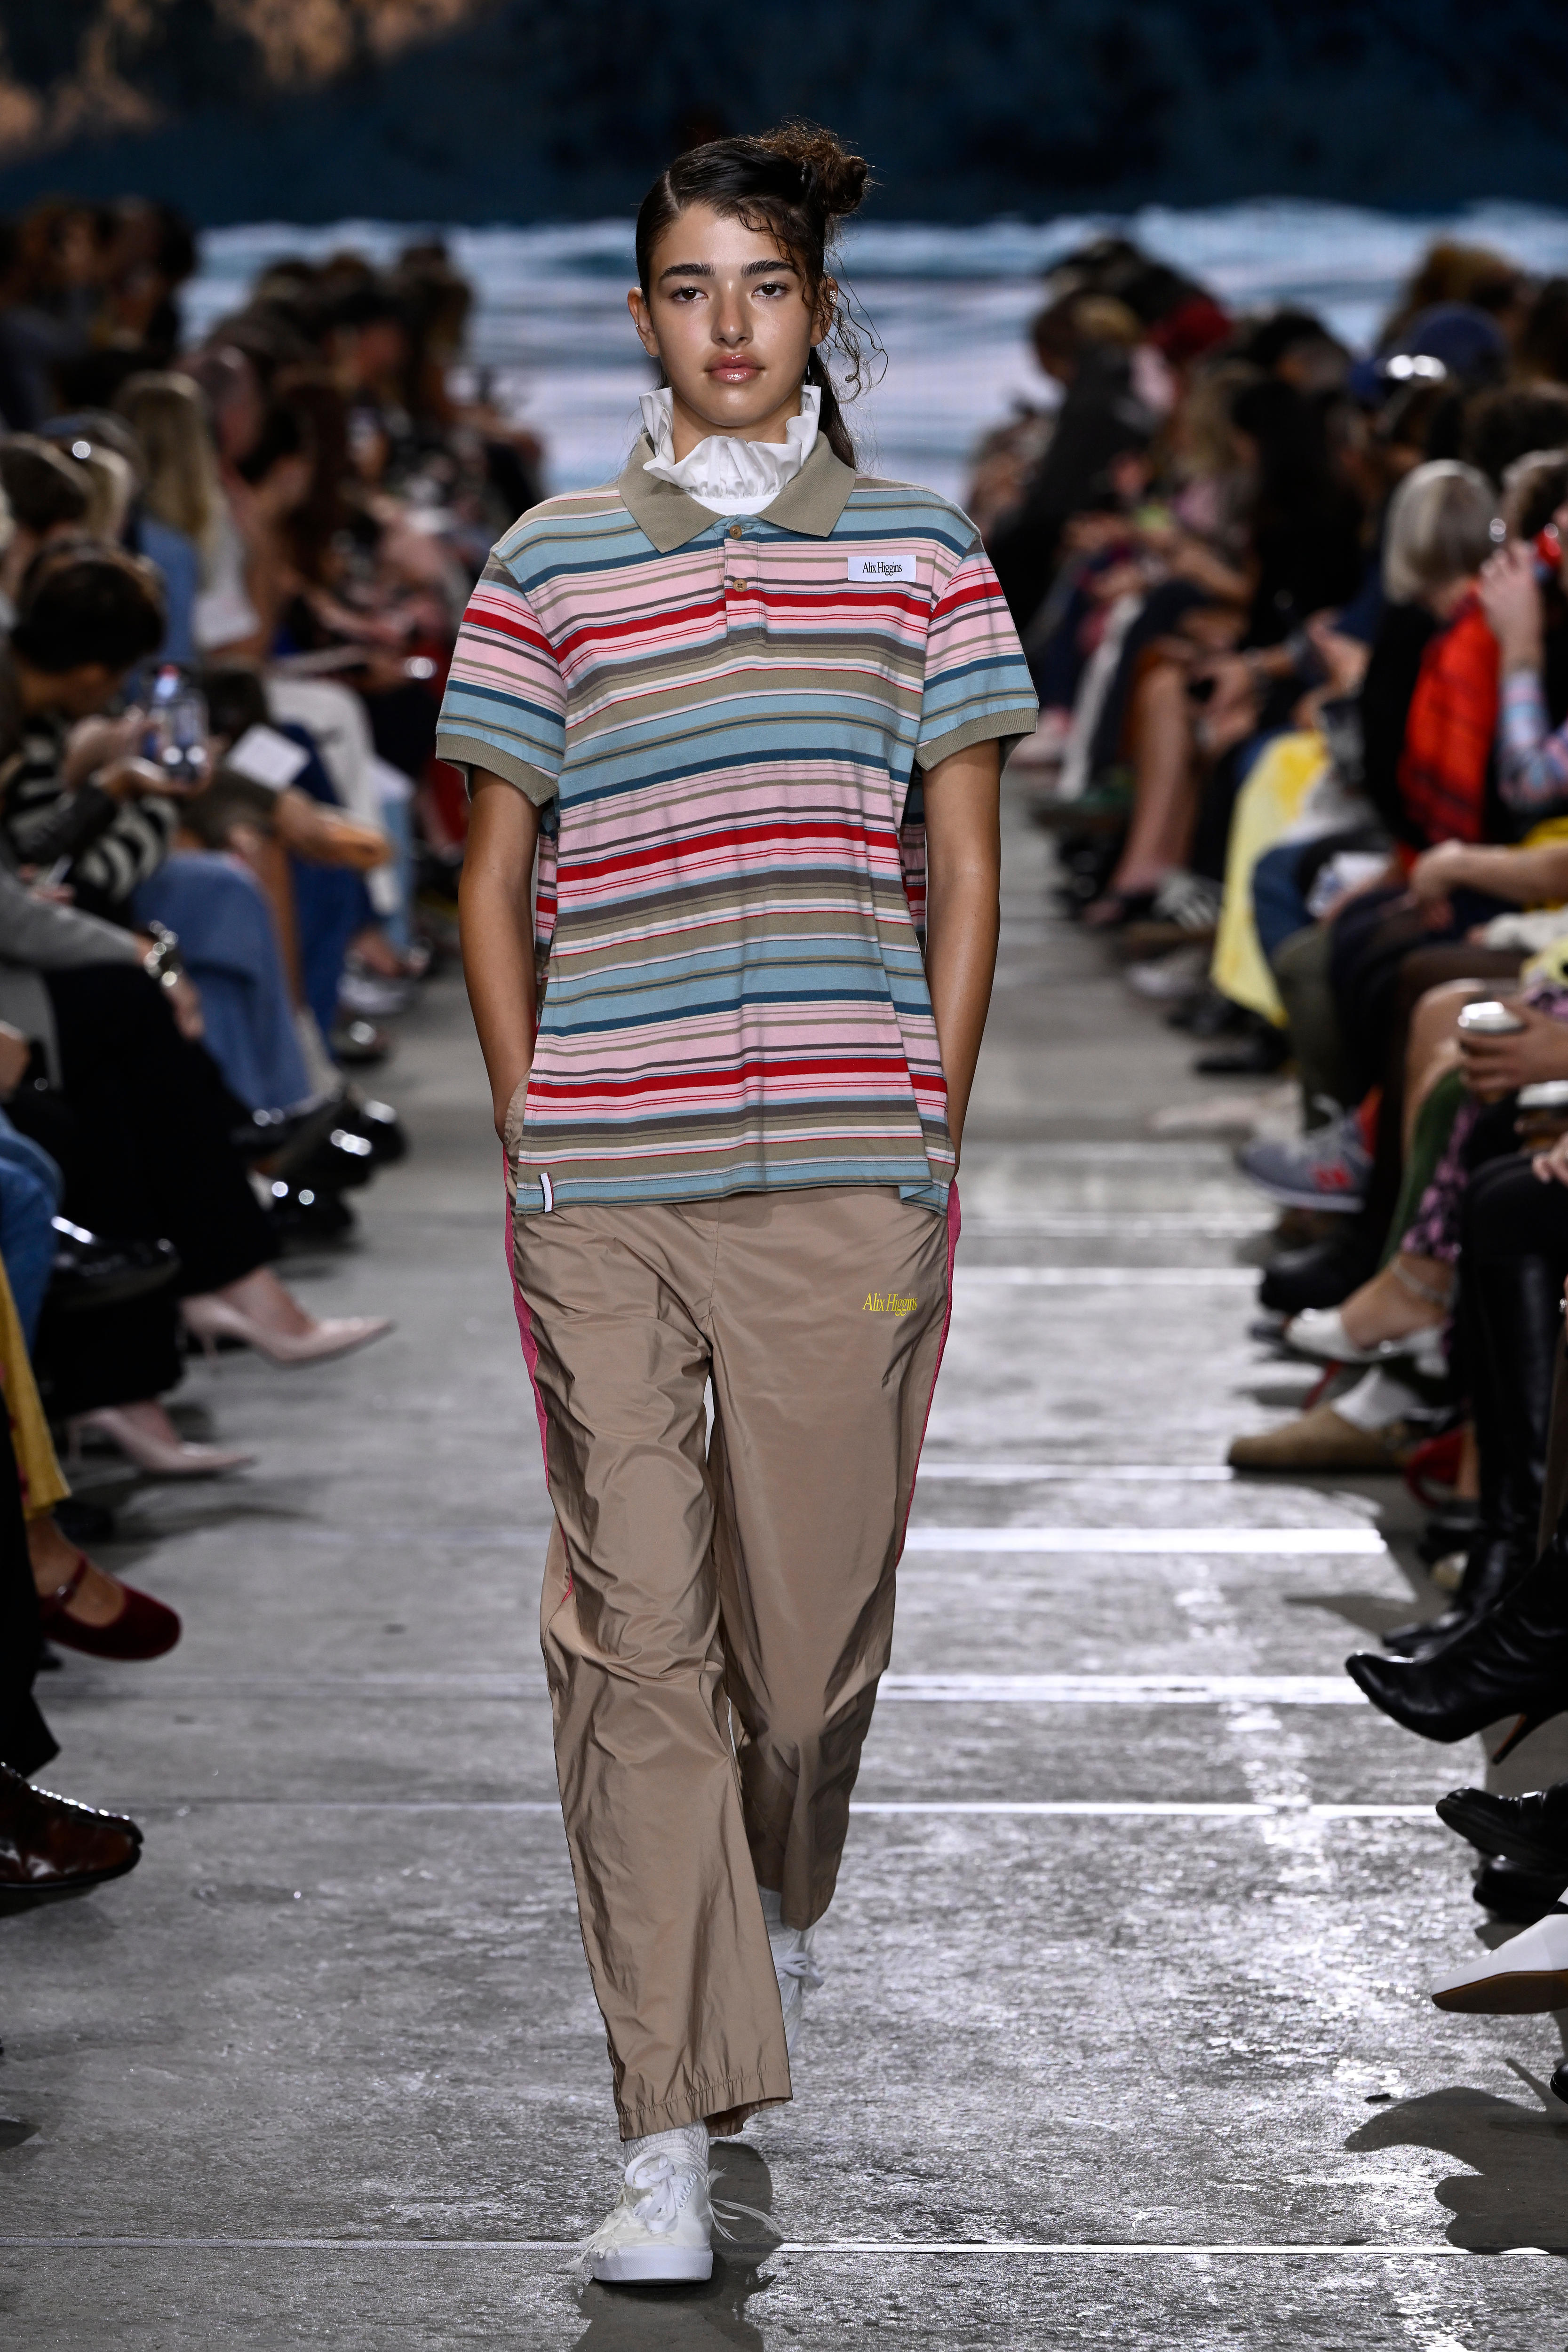 A model wears brown trakcpants and a multi-coloured polo shirt on the runway.